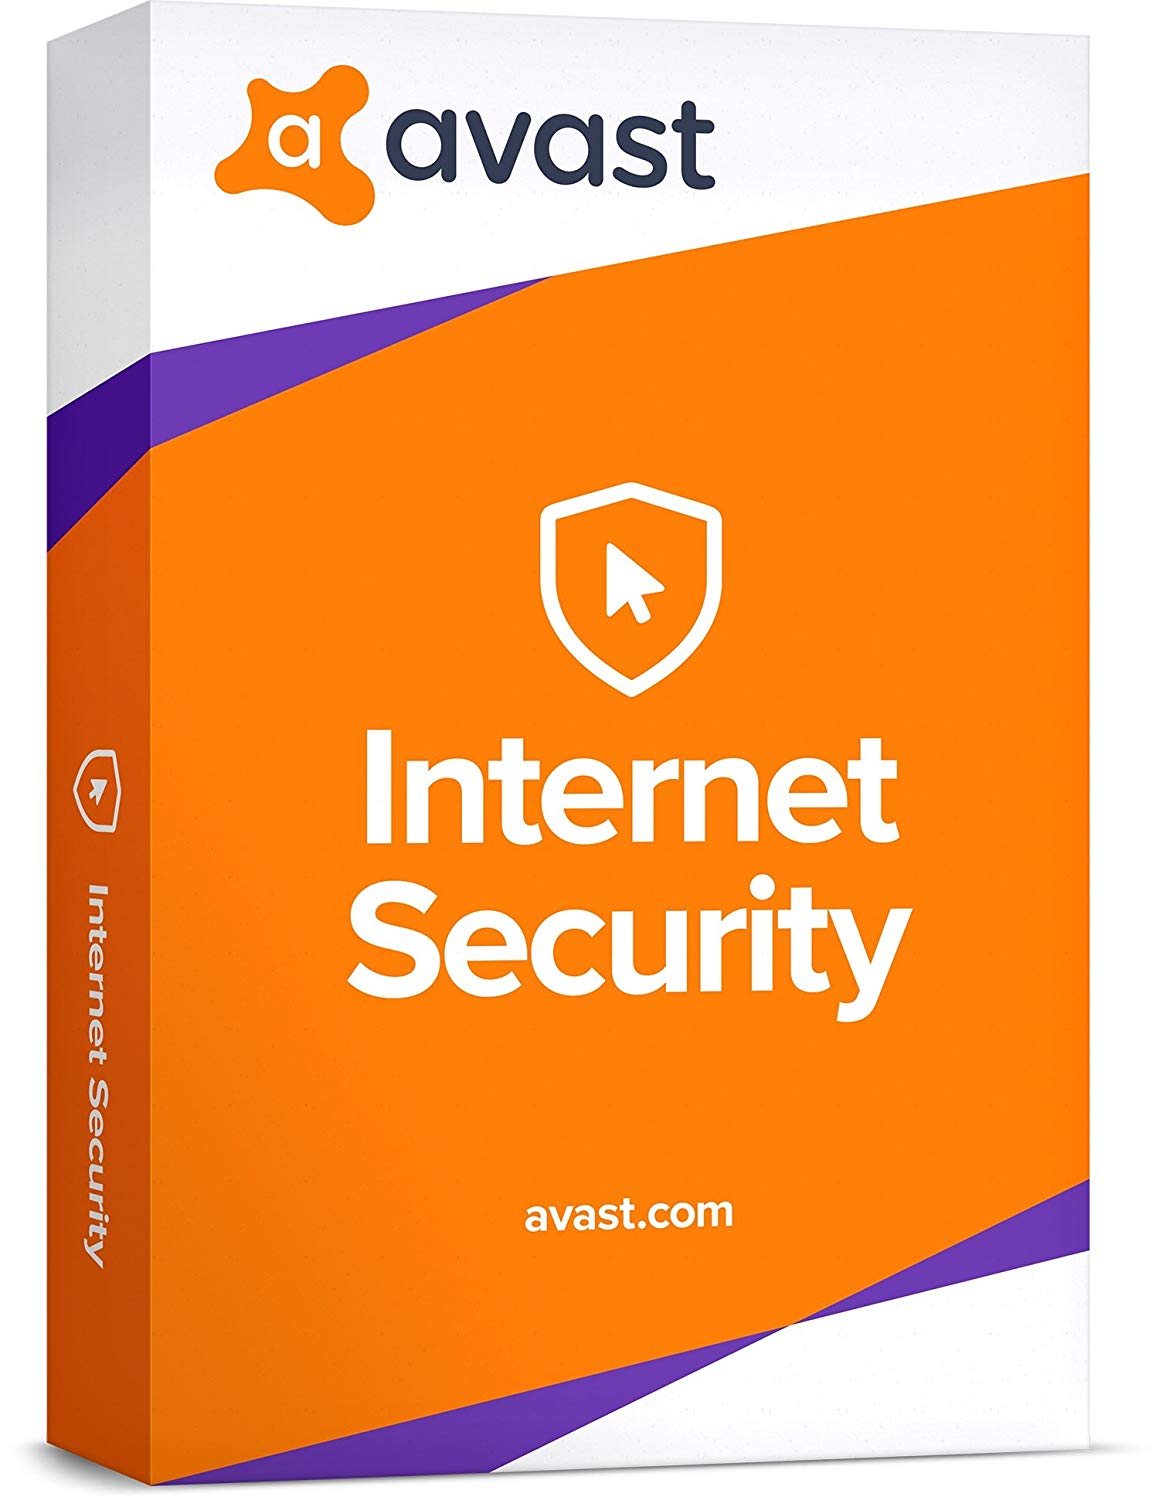 Avast Internet Security CD Key (Digital Download) - Various Options Available: Unlimited Devices